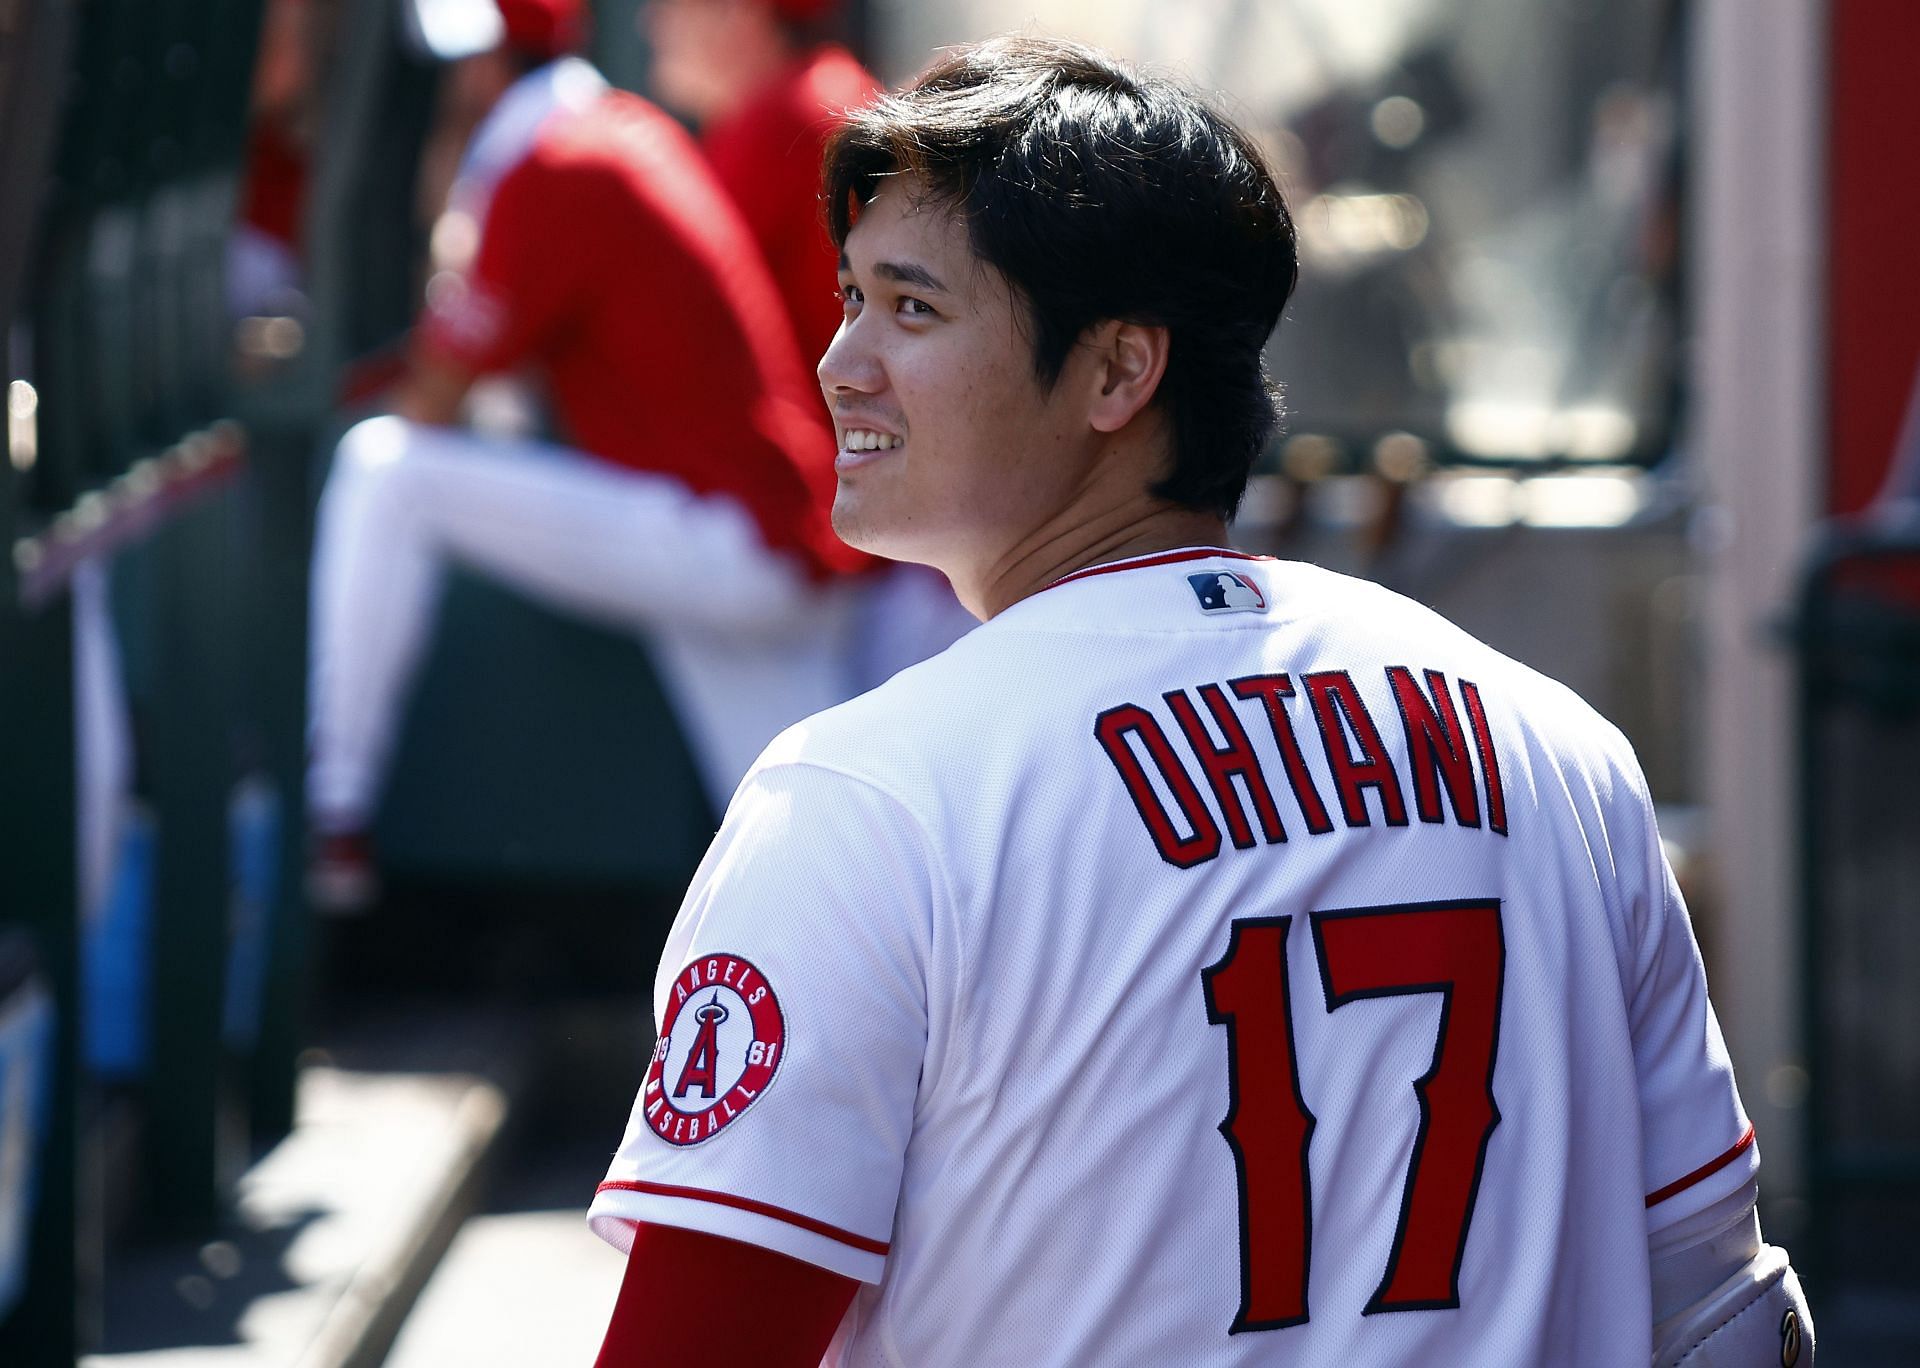 Shohei Ohtani Signs With Angels — Here's the Japanese Phenom's Story